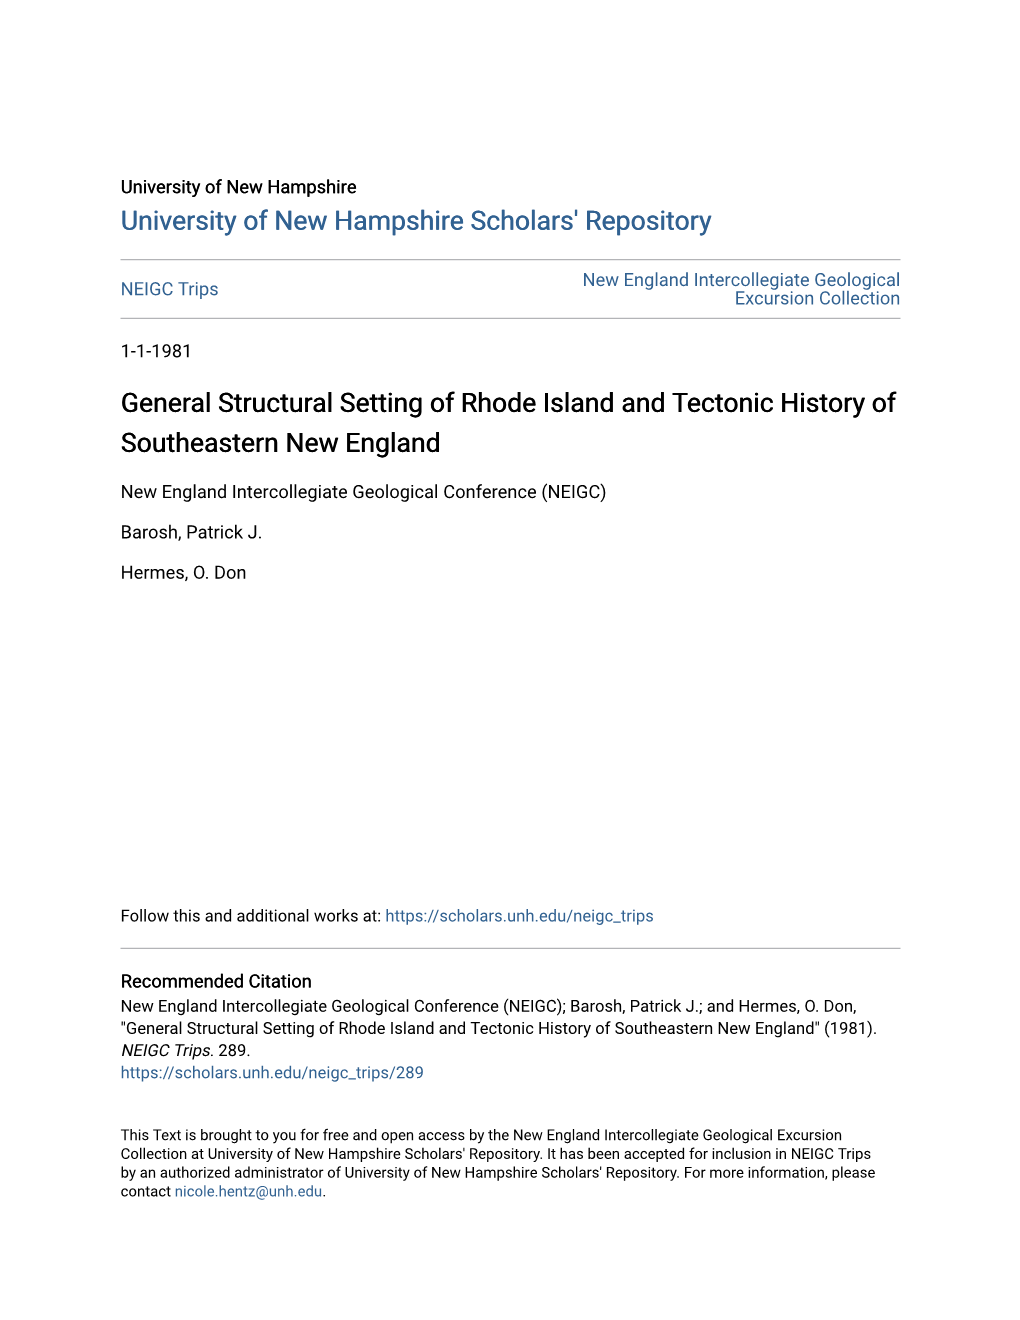 General Structural Setting of Rhode Island and Tectonic History of Southeastern New England